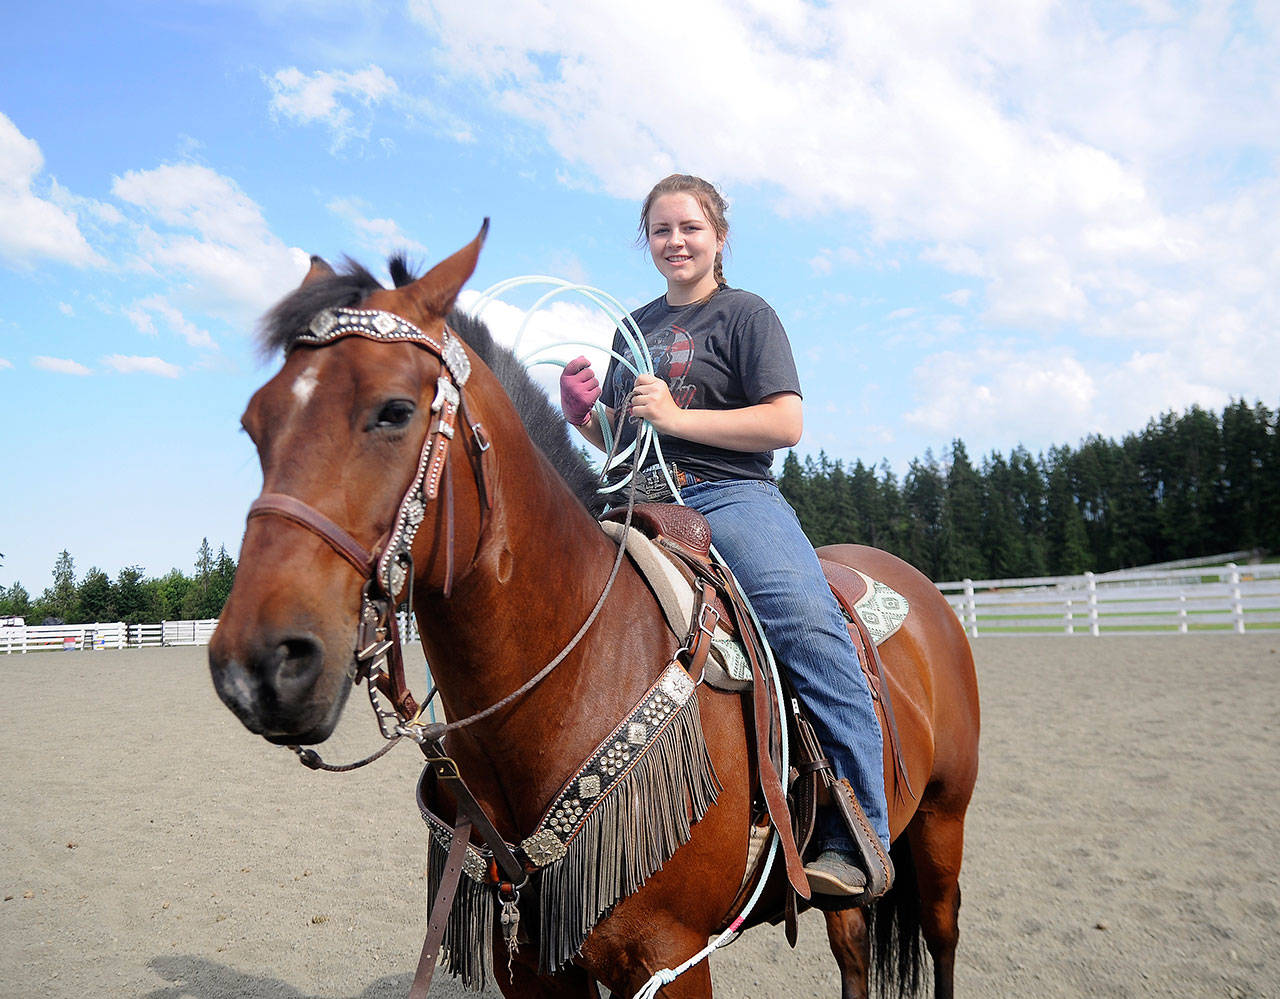 At home on horseback: Amelia Hermann is a state rodeo champ at 14